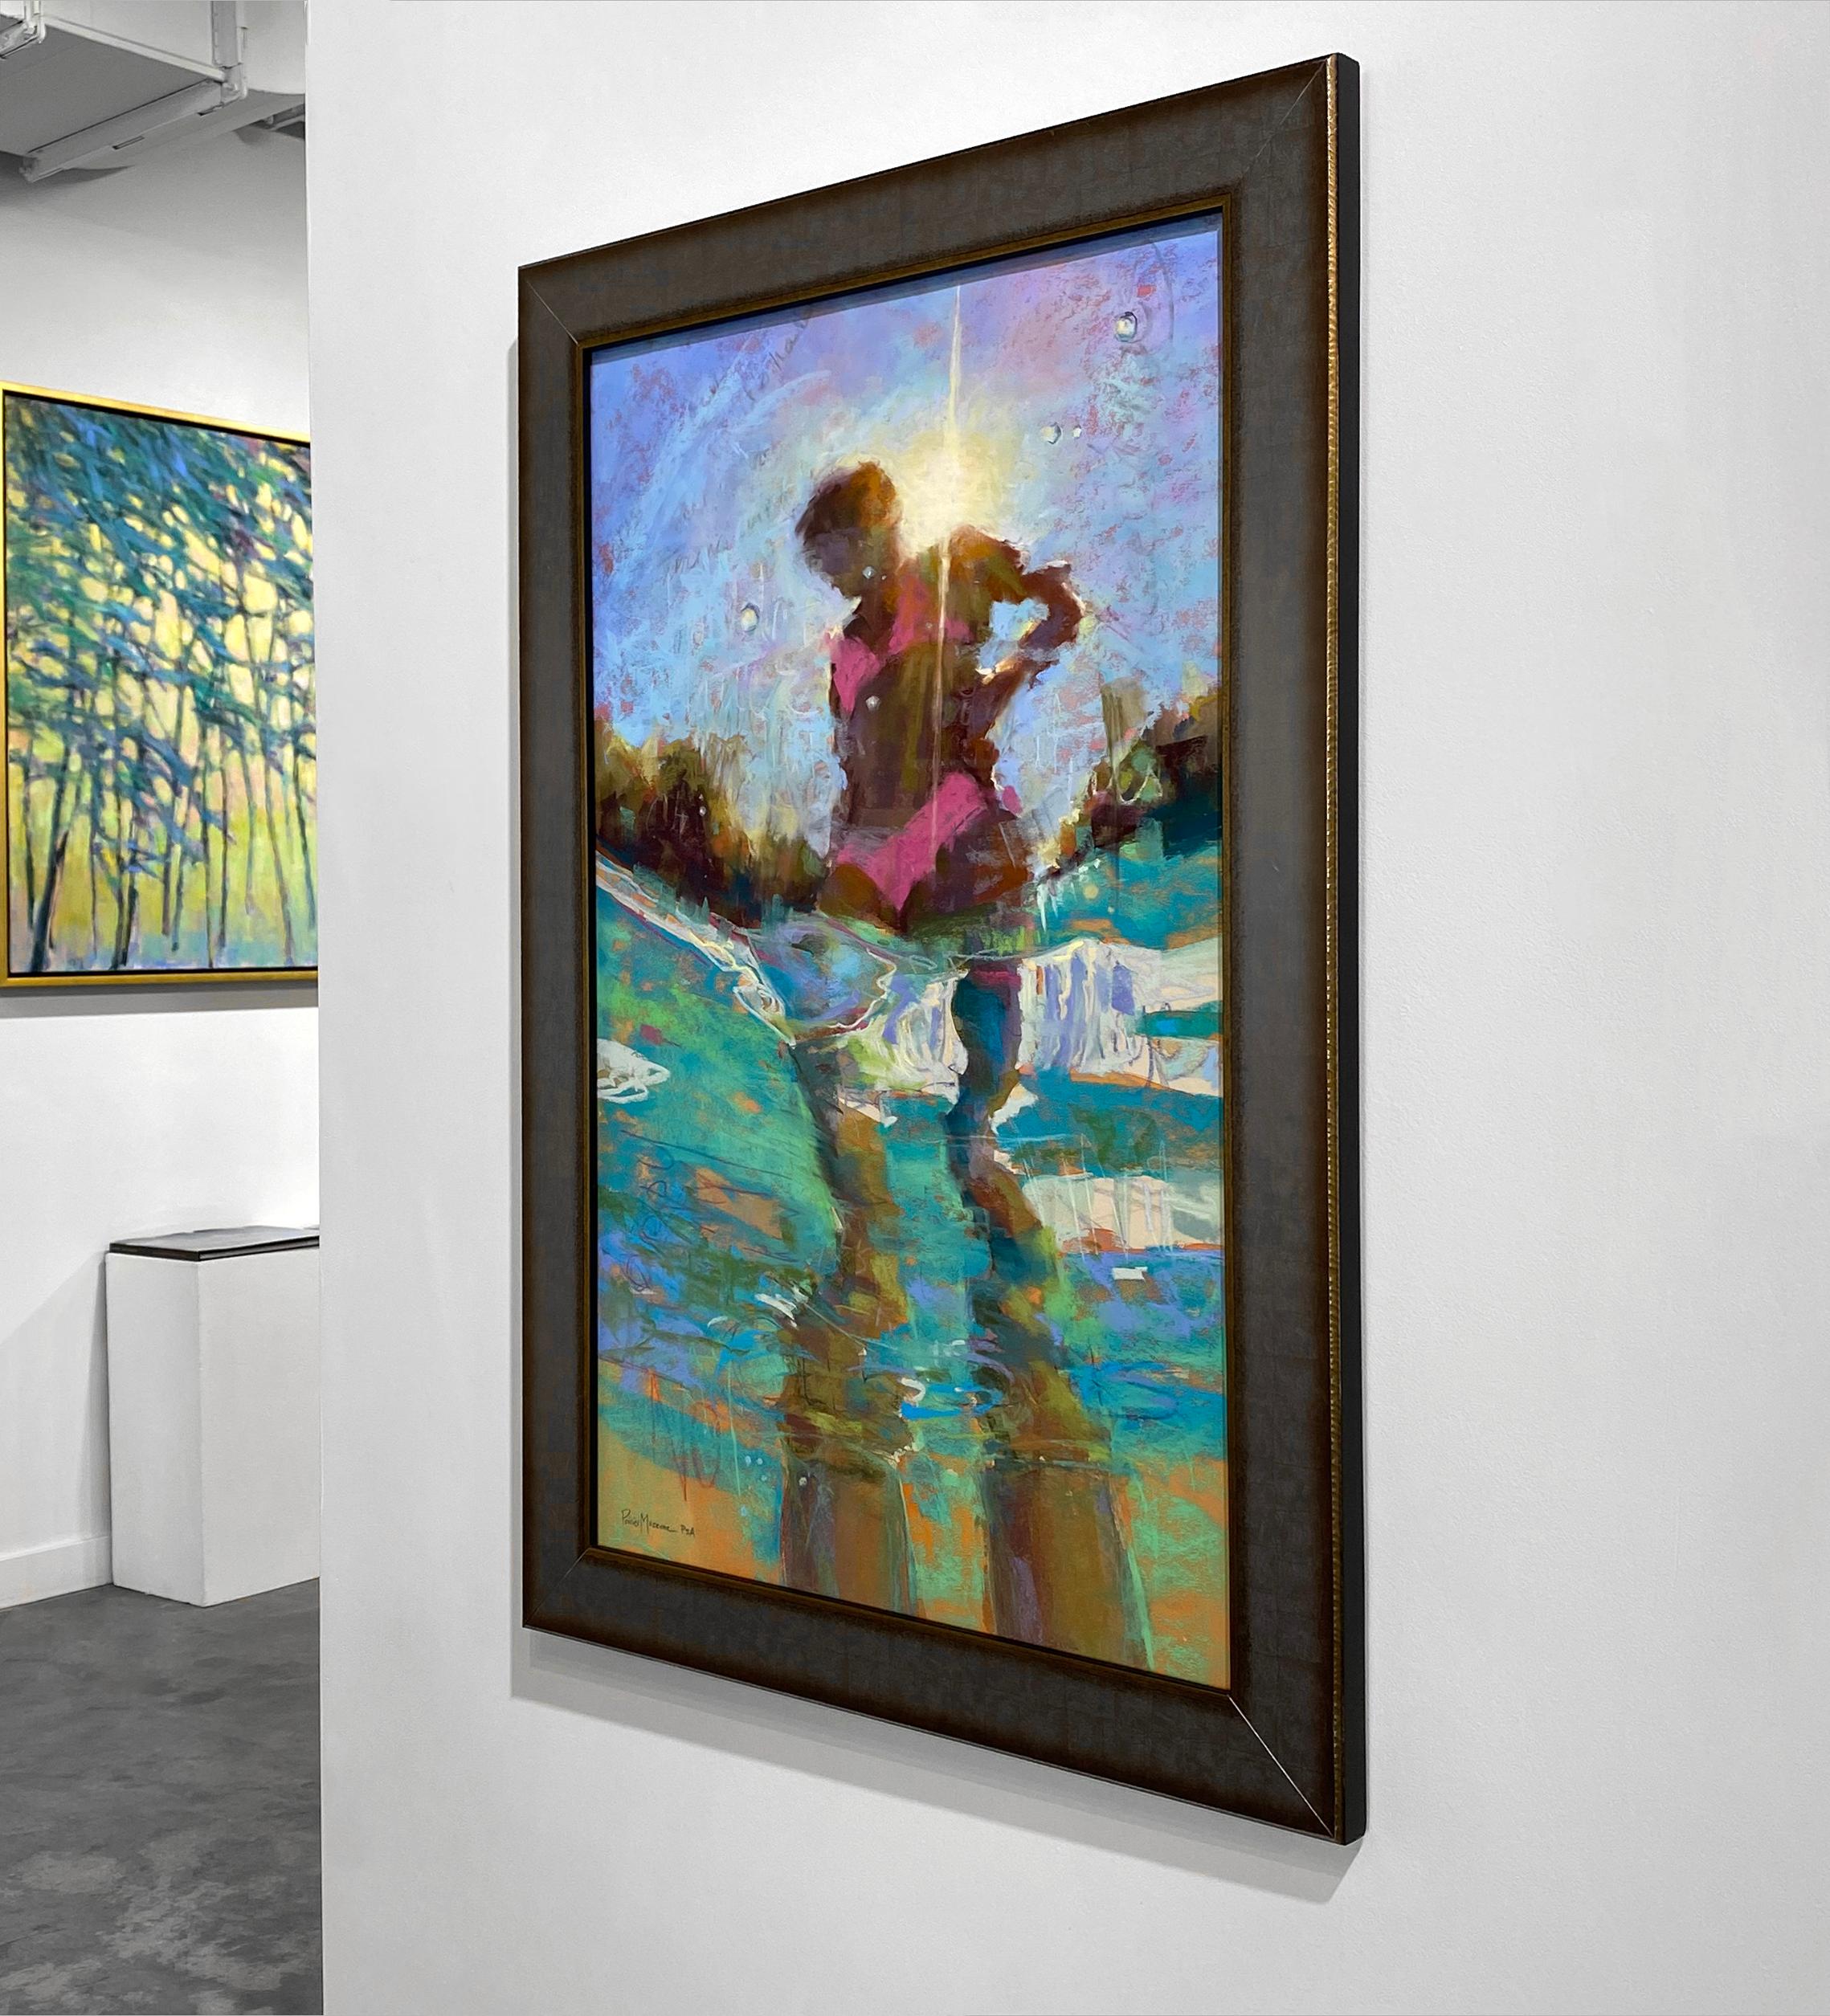 This abstract under water piece by Michele Poirier-Mozzone is captured from an angle at surface of water, looking up at a woman wearing a neon pink bikini bathing suit. The artist depicts the water using shapes and lines of bright green, blue,